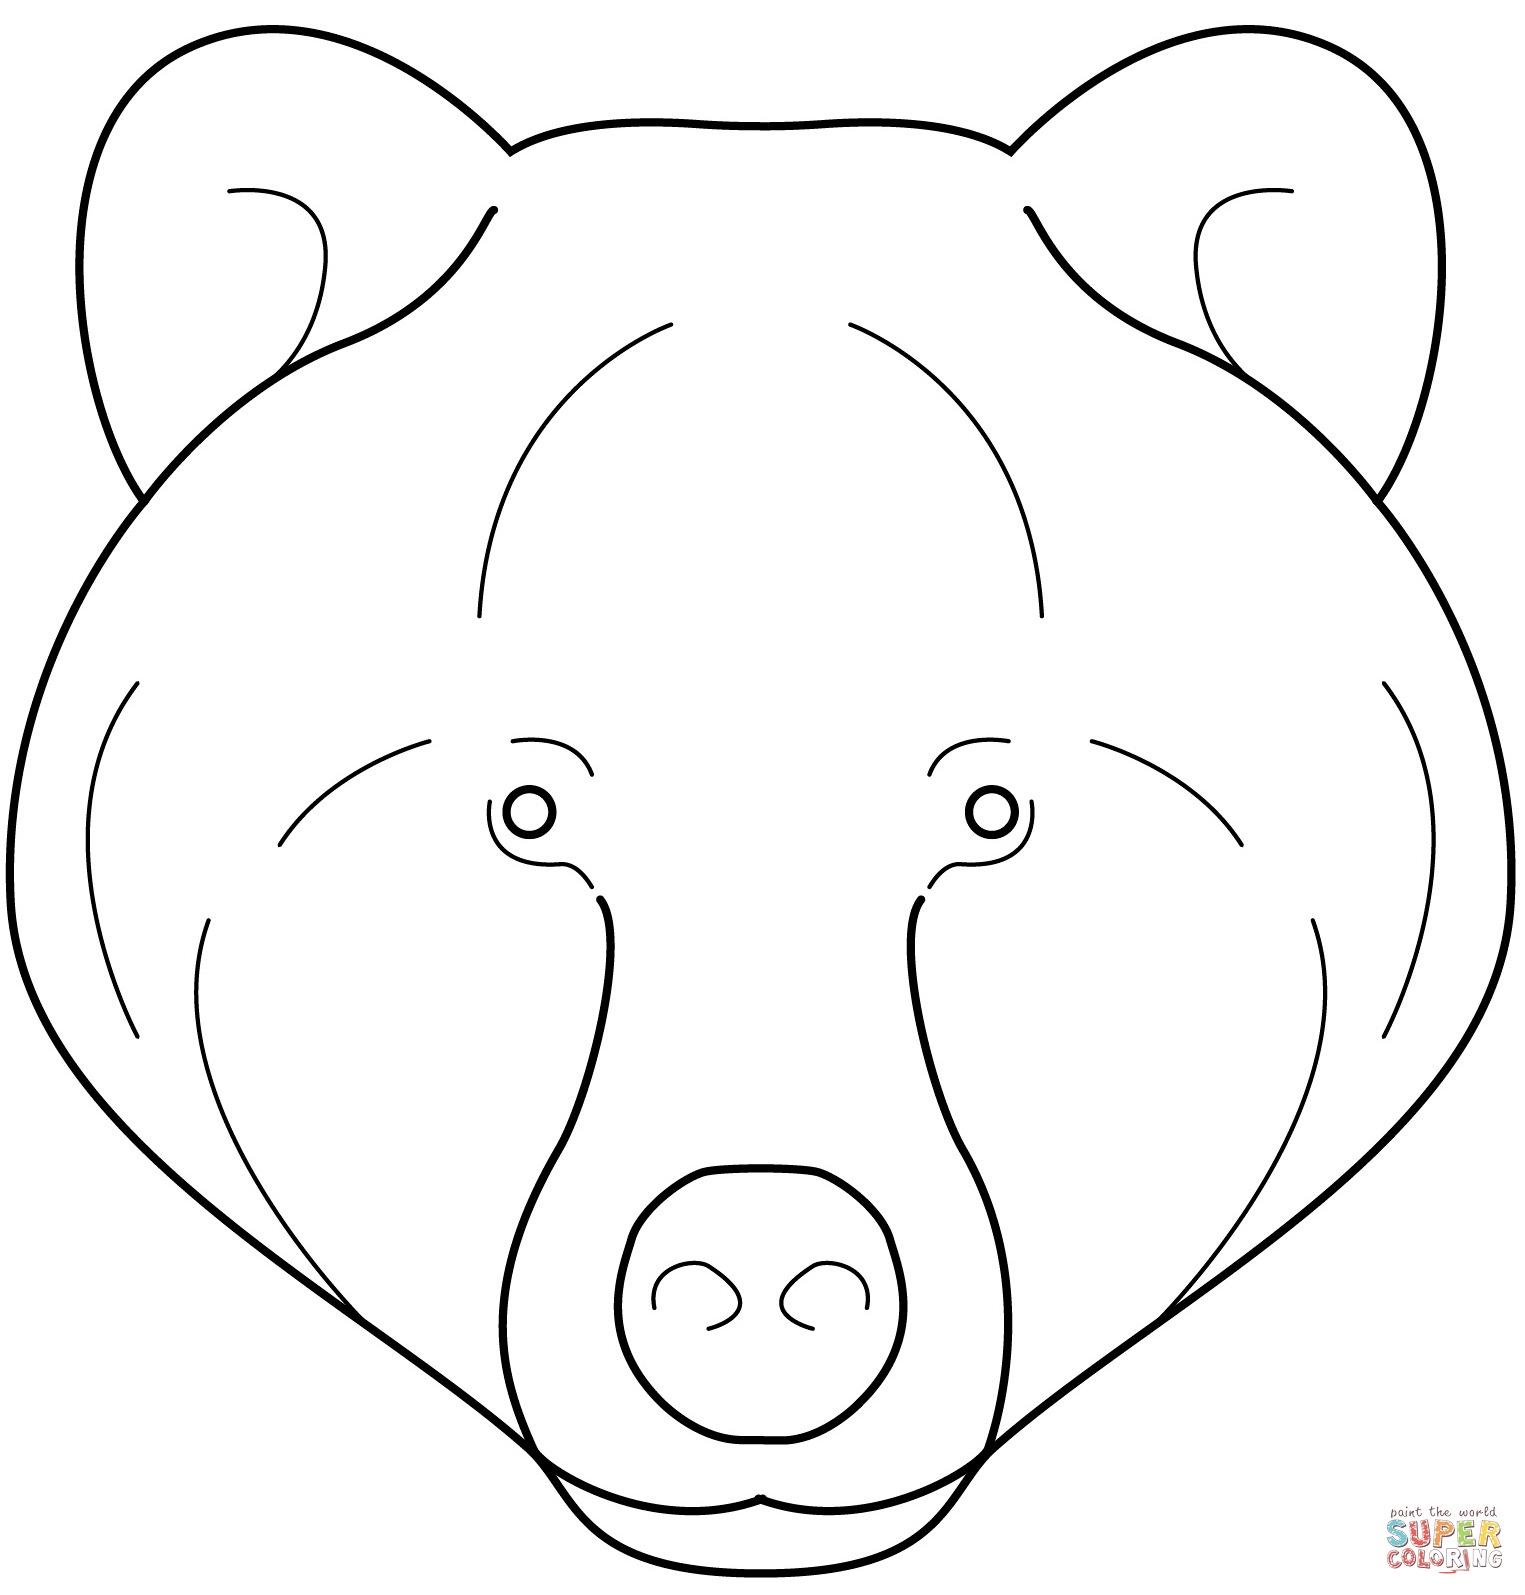 Bear Face coloring page | Free Printable Coloring Pages